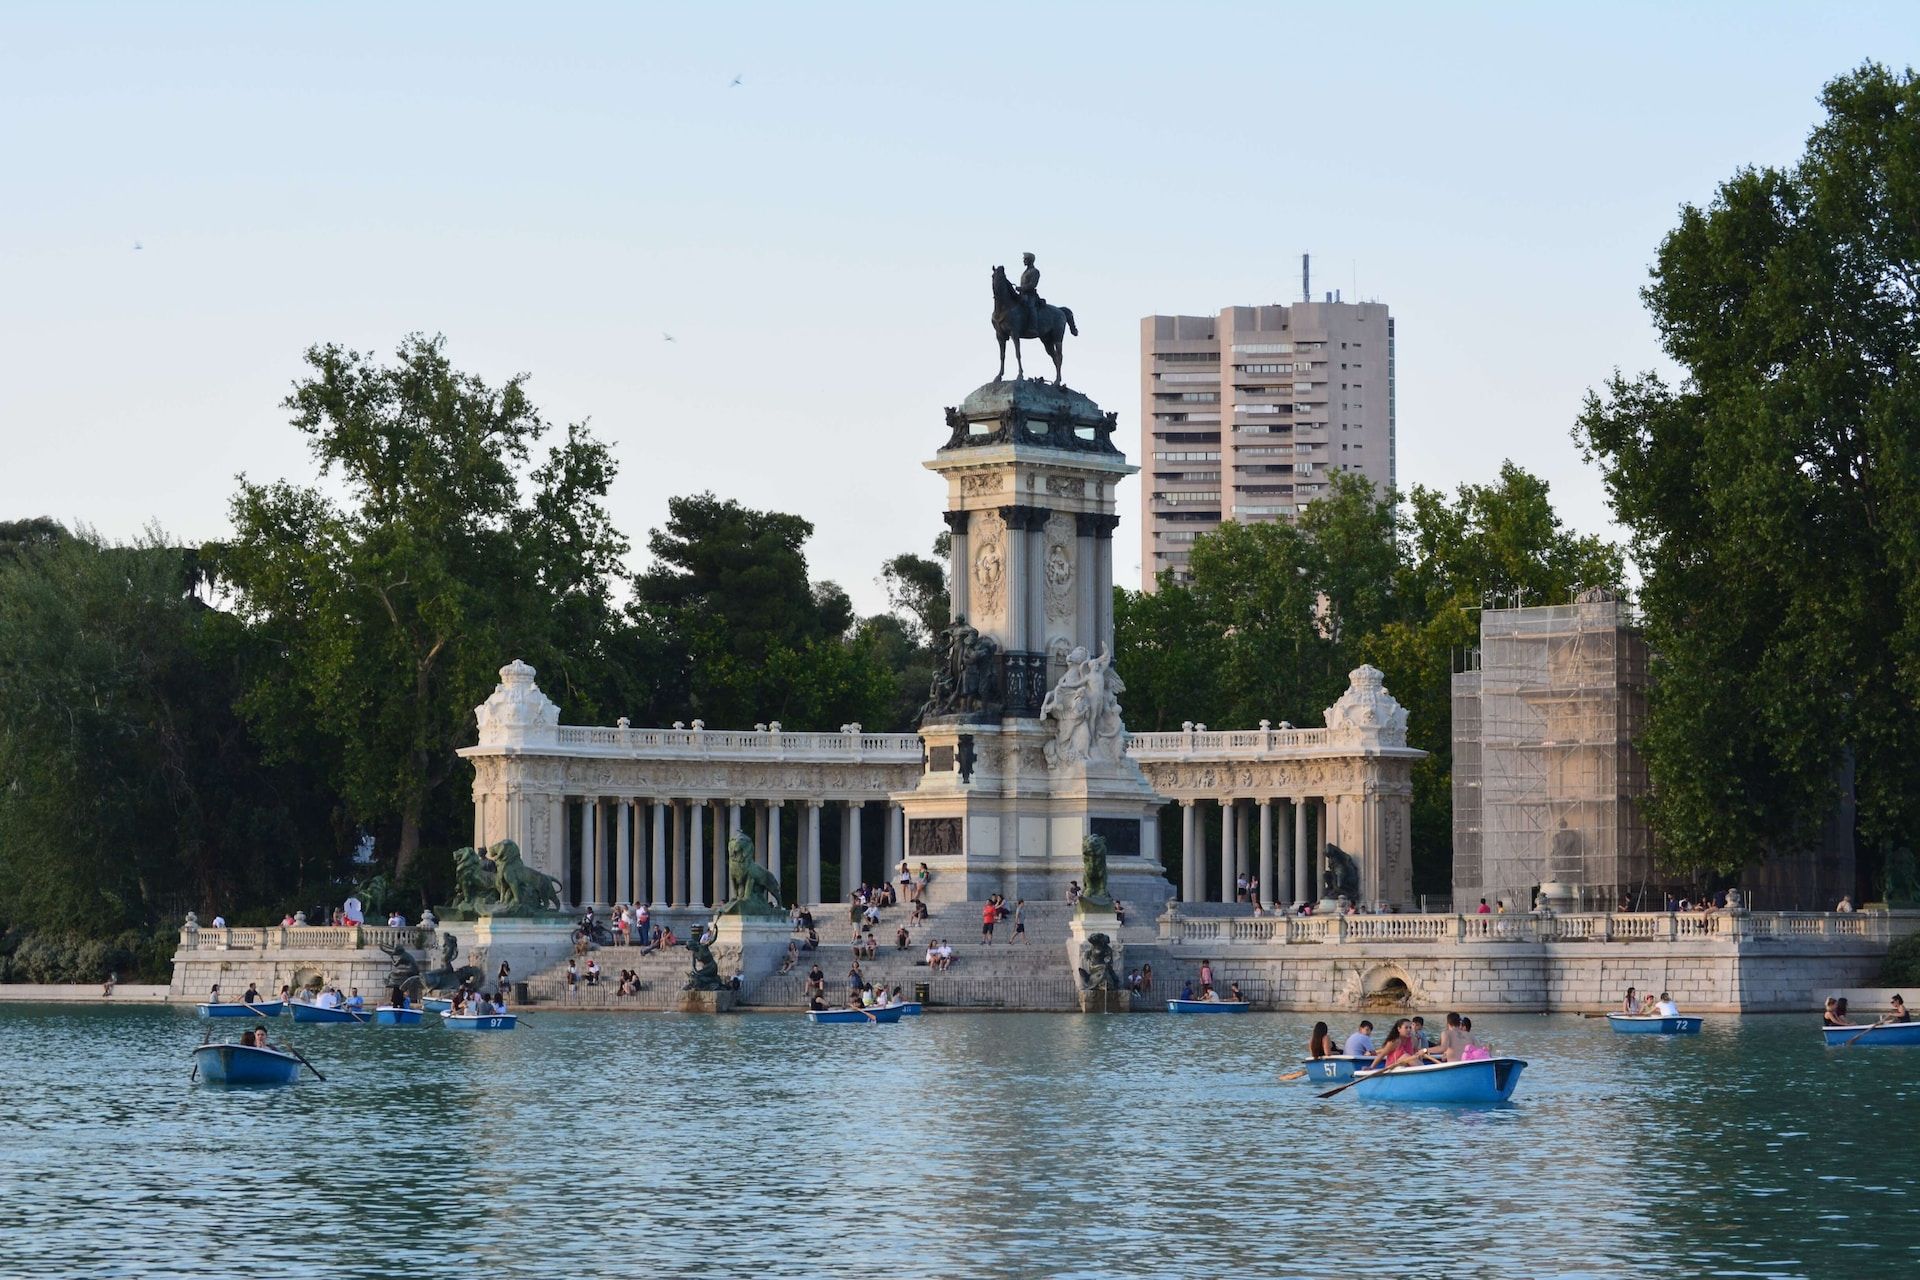 El Retiro Park is one of the best parks in the capital